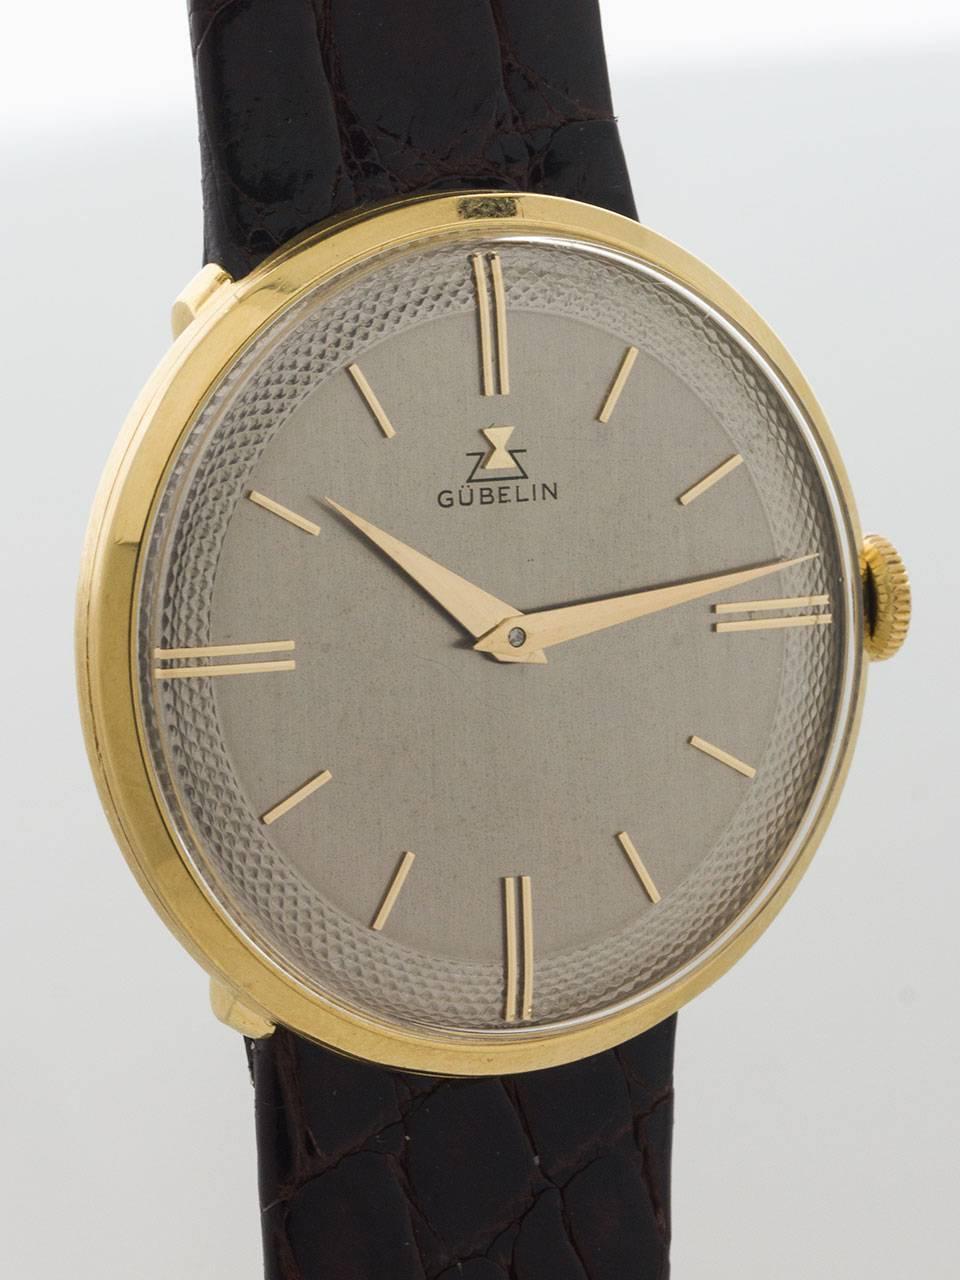 Gubelin 18K Yellow Gold thin and elegant Dress Model circa 1960s. Featuring beautiful condition 34mm diameter case with recessed lugs and low dome crystal. Beautiful original greyed silvered dial with perimeter textured pattern, with applied subtle